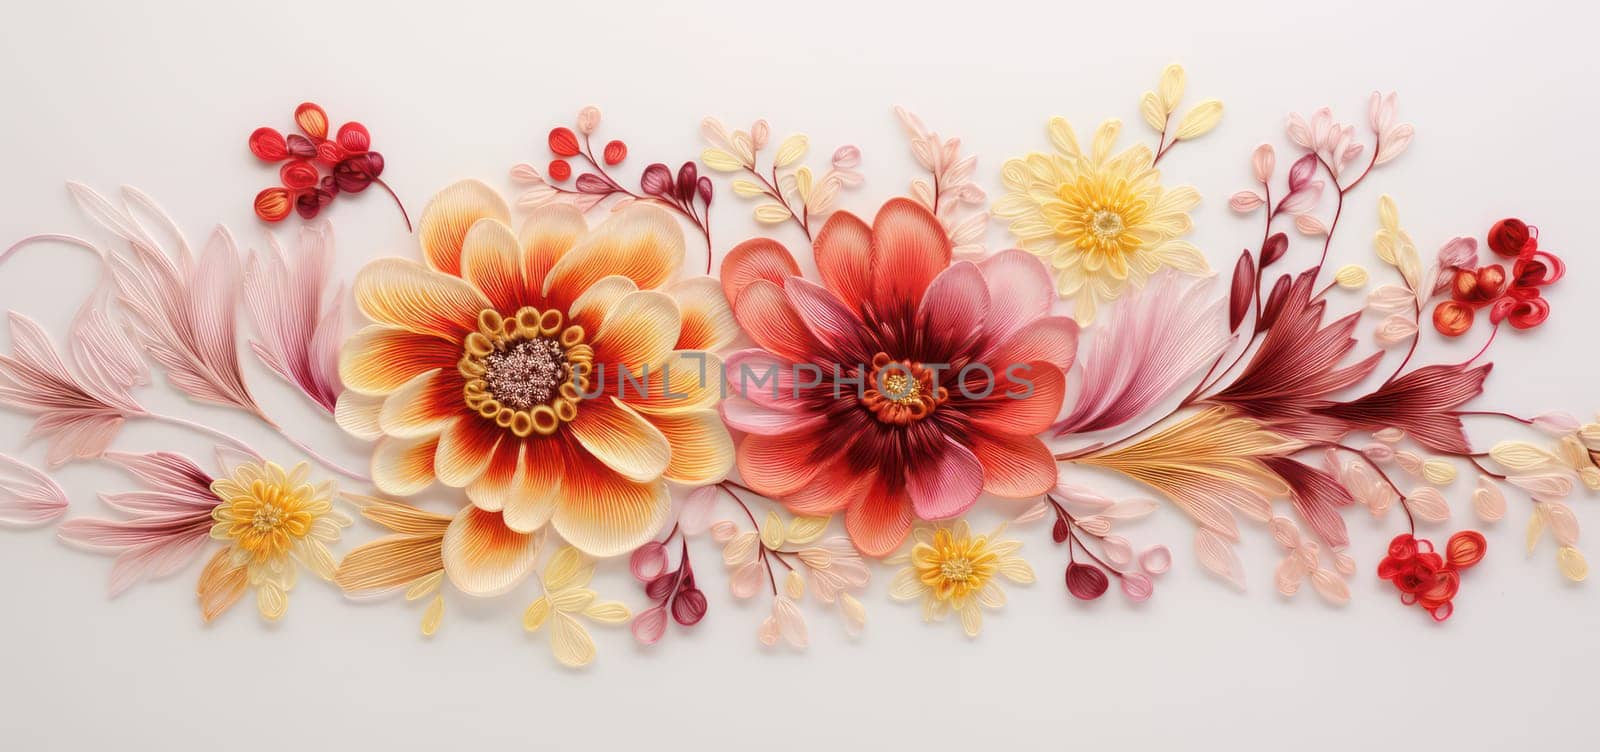 Colorful Floral Beauty on Romantic Pink Background by Vichizh